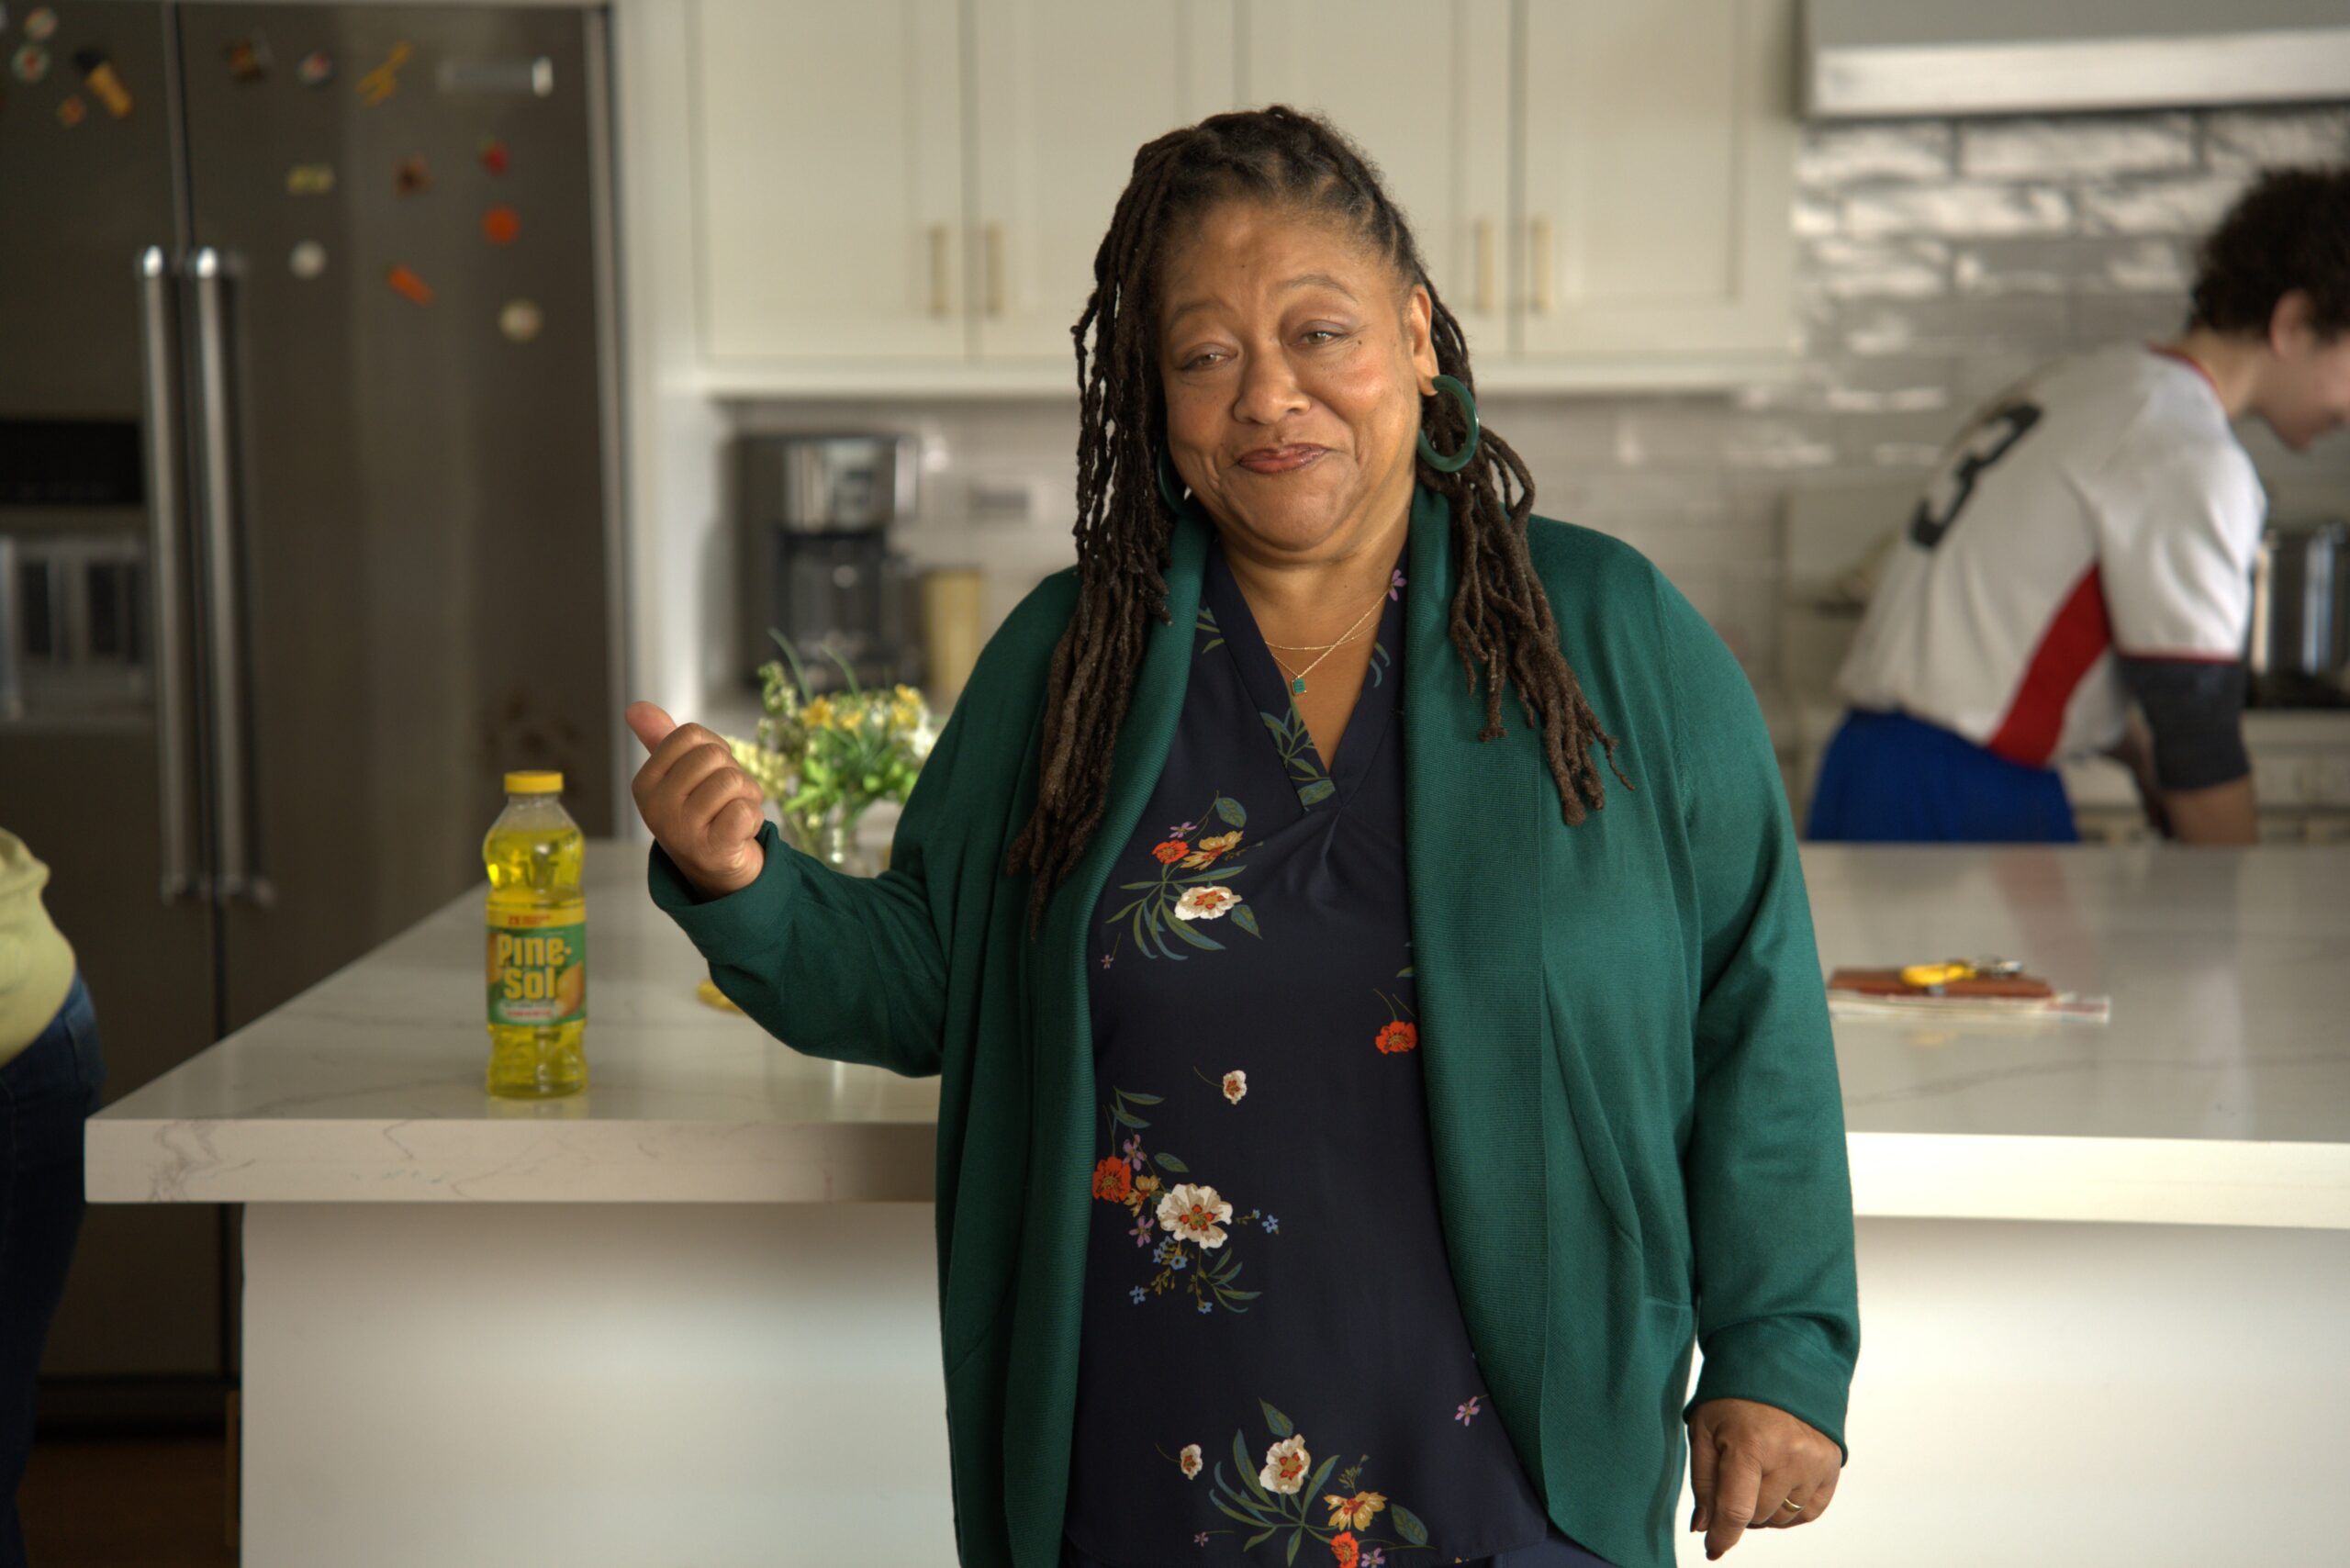 'The Pine-Sol Lady' Diane Amos On Celebrating 30 Years As The Face Of The Brand, #CleanTok And Being One Of The OG Influencers